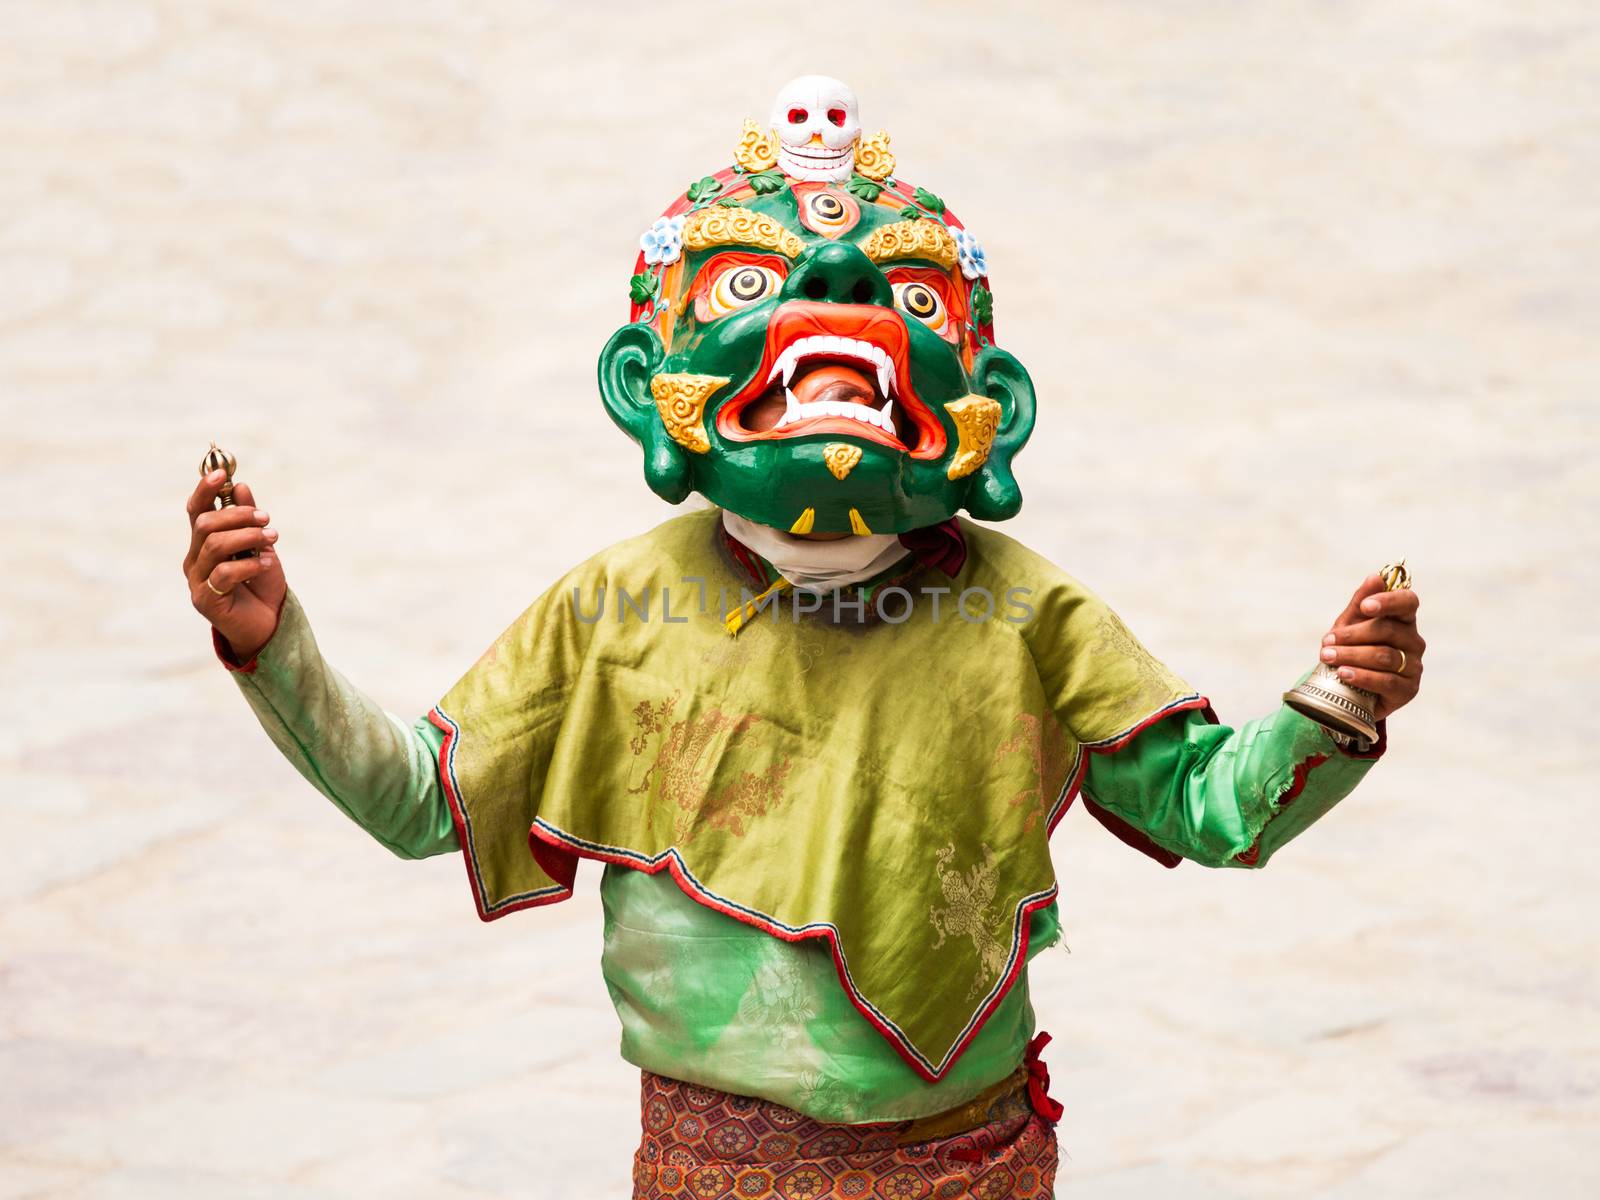 Unidentified monk with ritual bell and vajra performs a religious masked and costumed mystery dance of Tibetan Buddhism during the Cham Dance Festival in Hemis monastery, India.